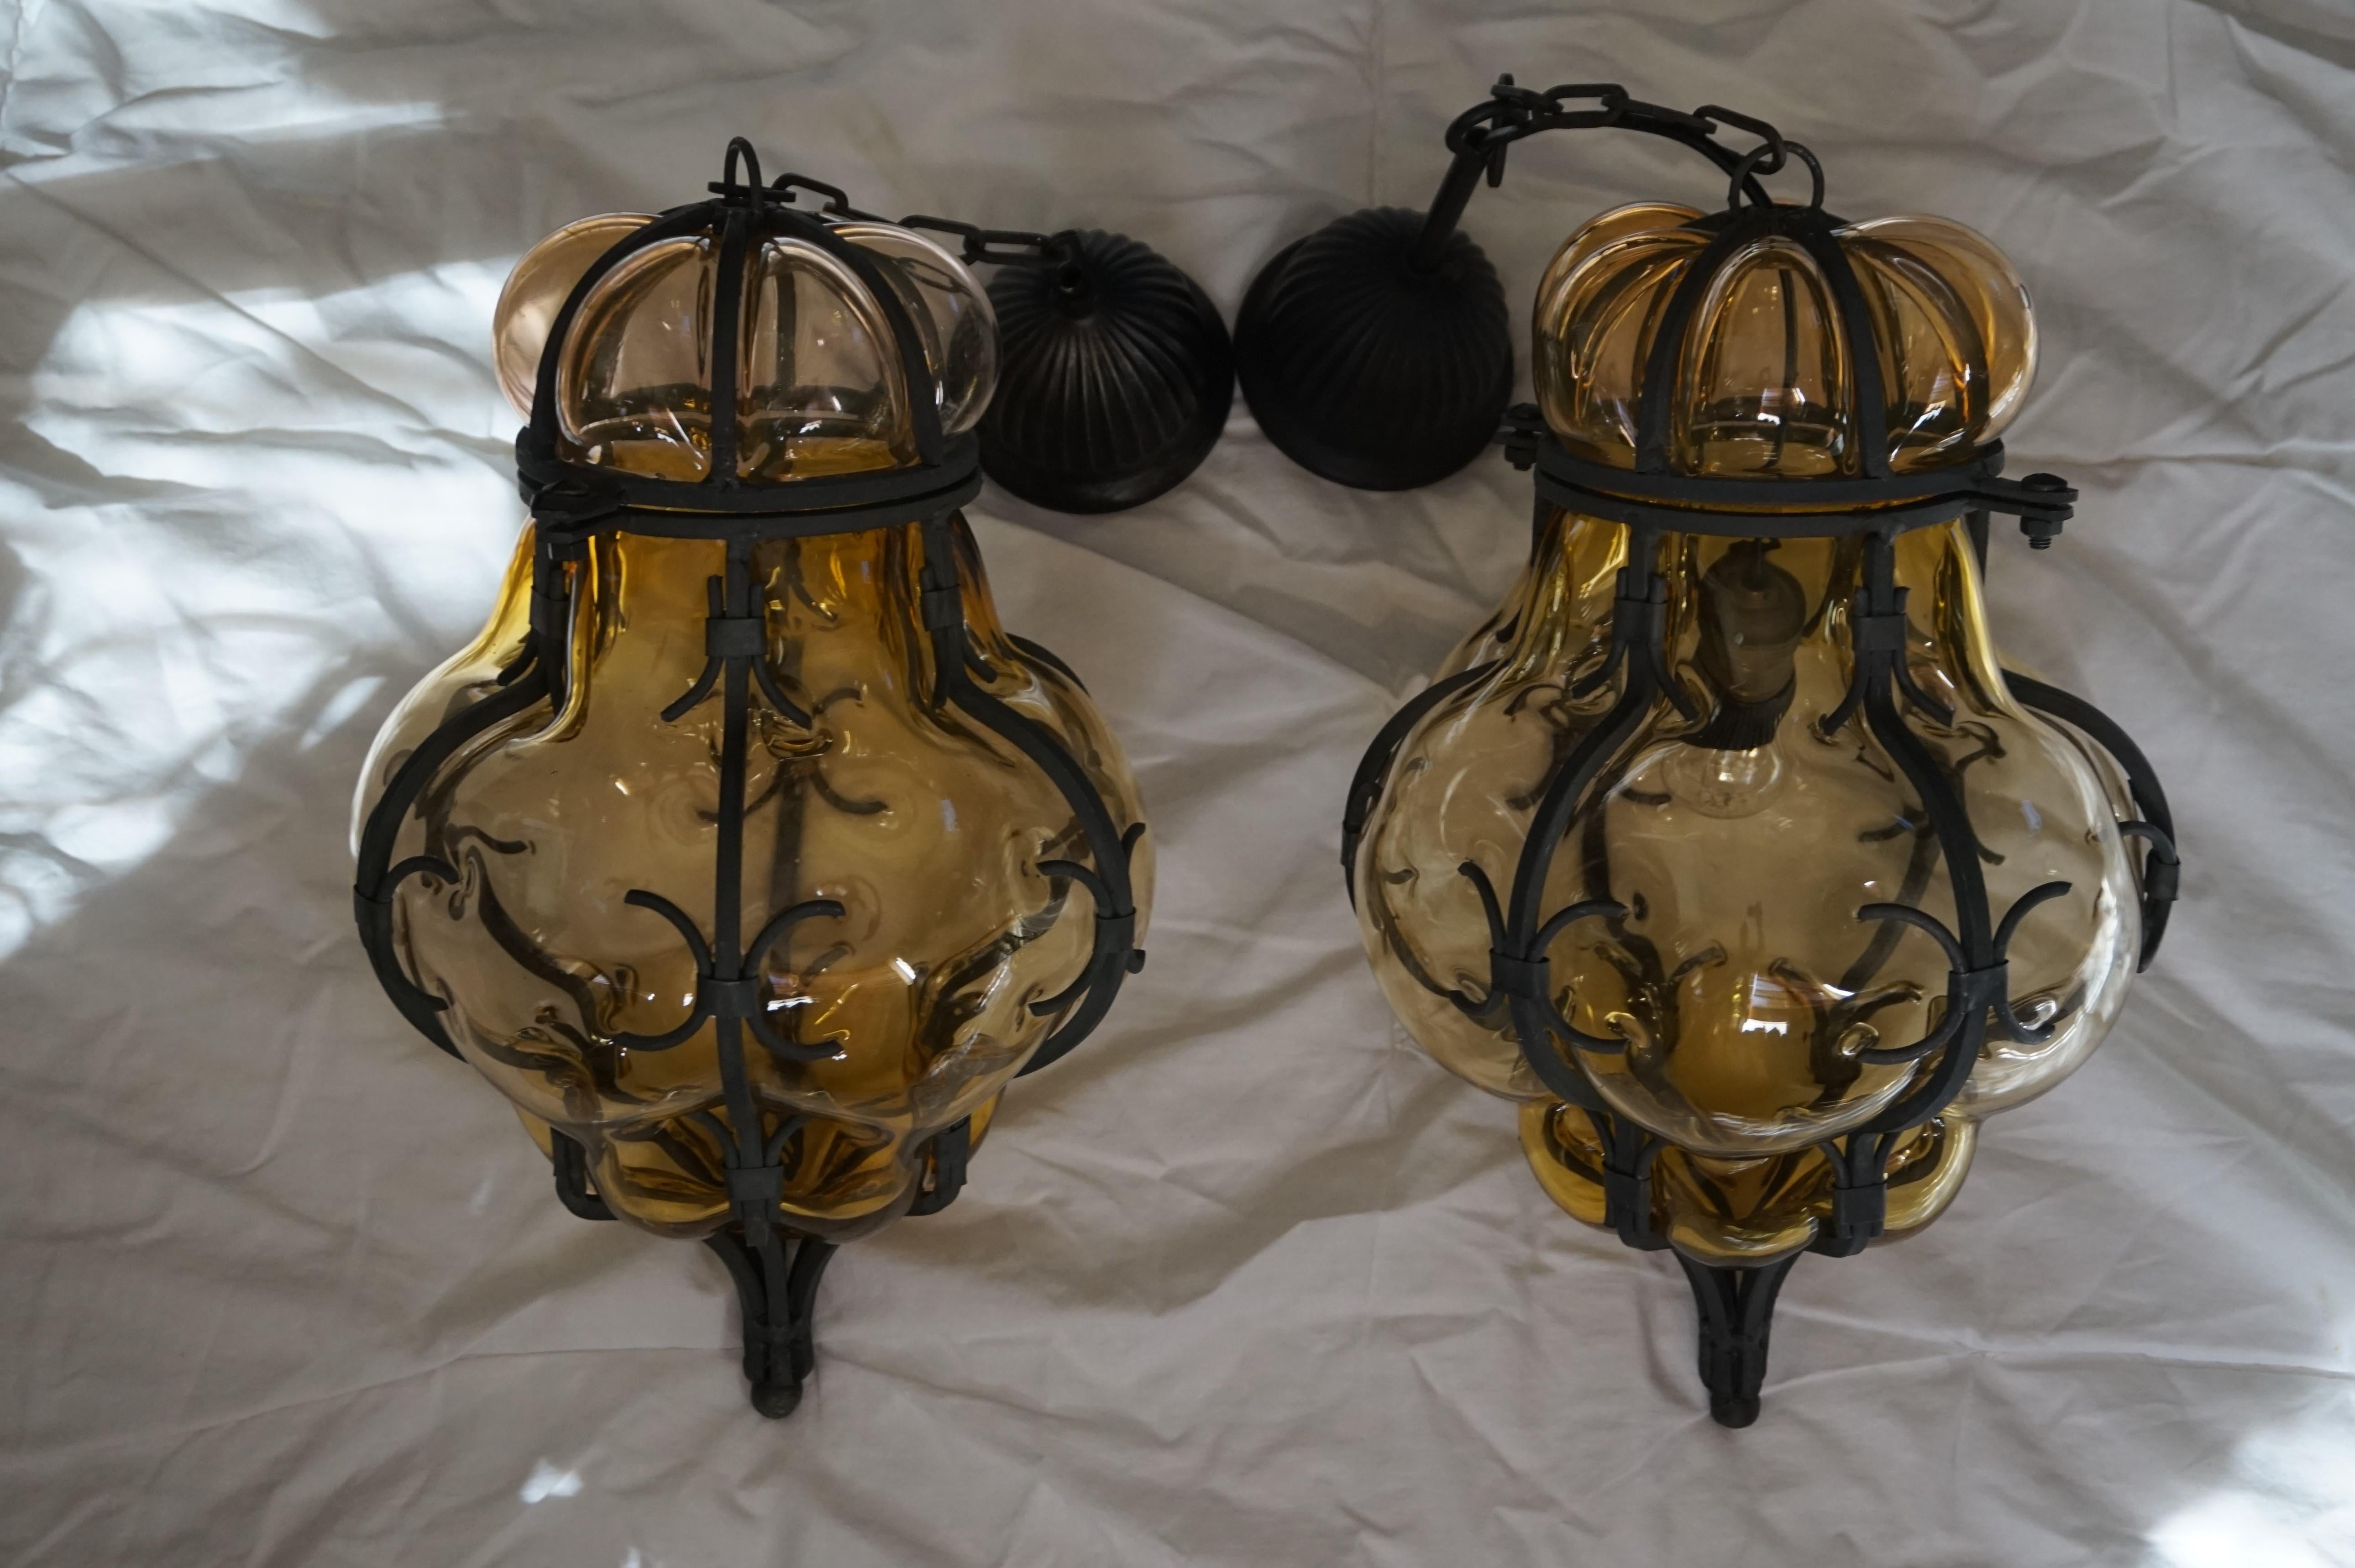 Hand-Crafted Rare Pair of Venetian Mouth Blown Amber Glass in Wrought Iron Frame Pendants